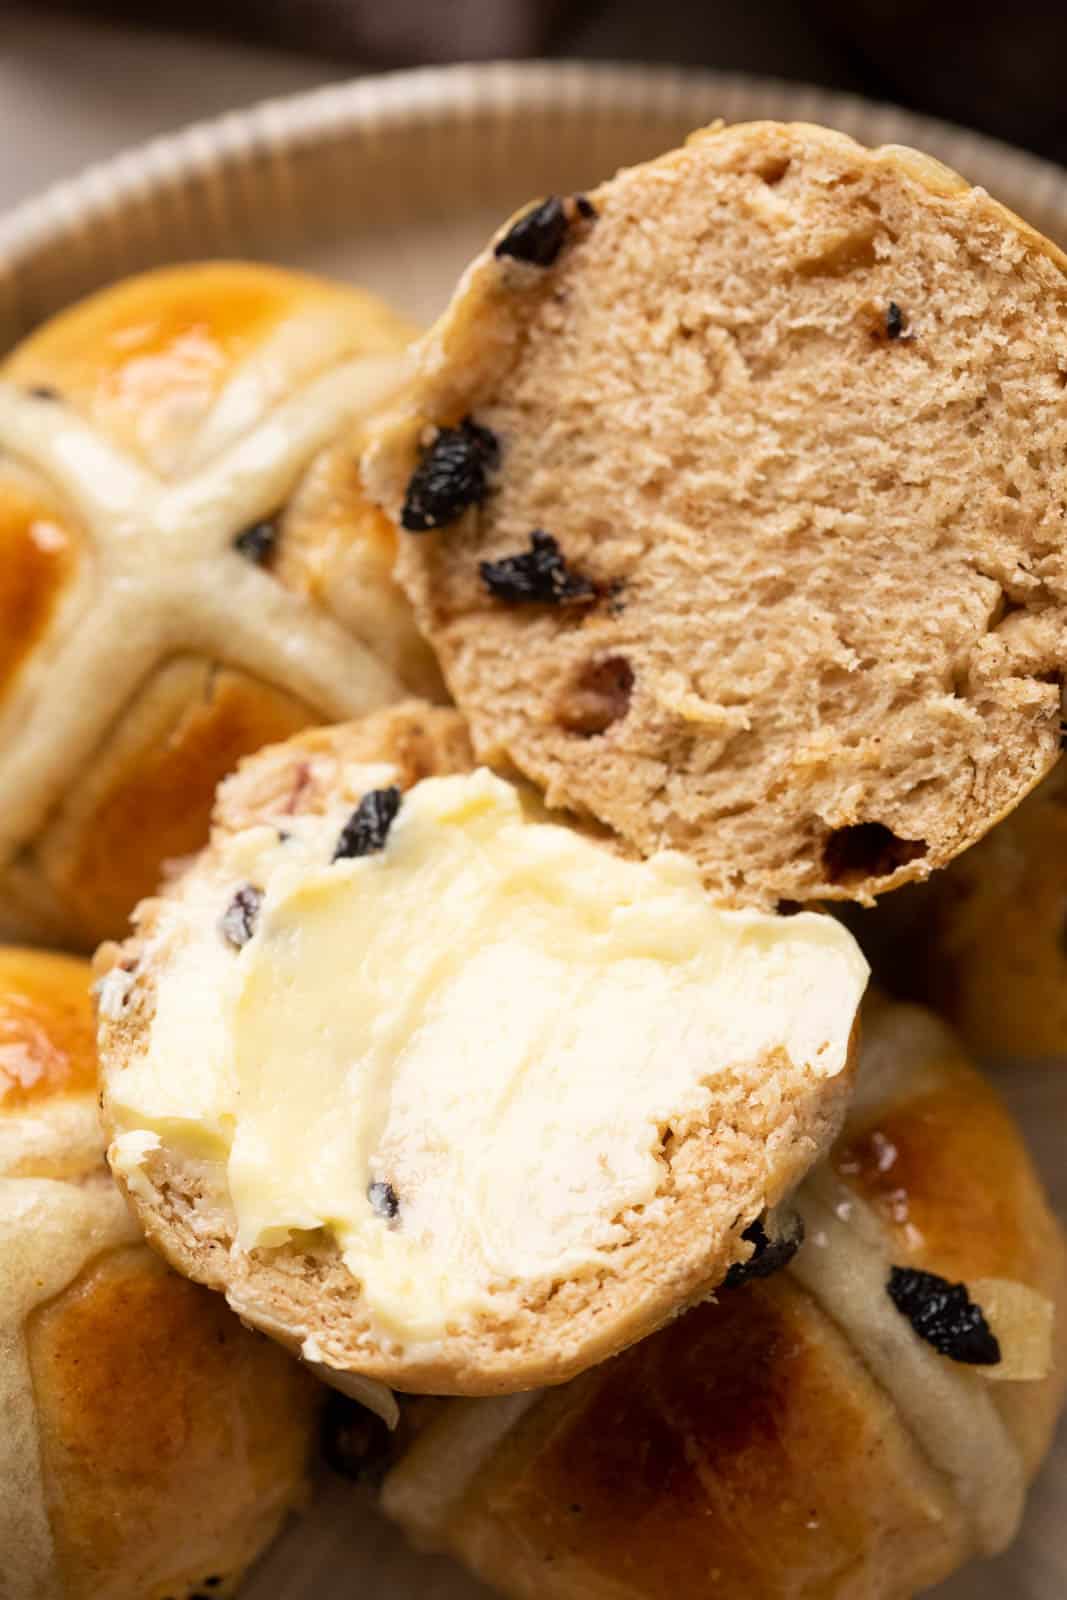 A hot cross bun that has been sliced oven with soft butter slathered on it